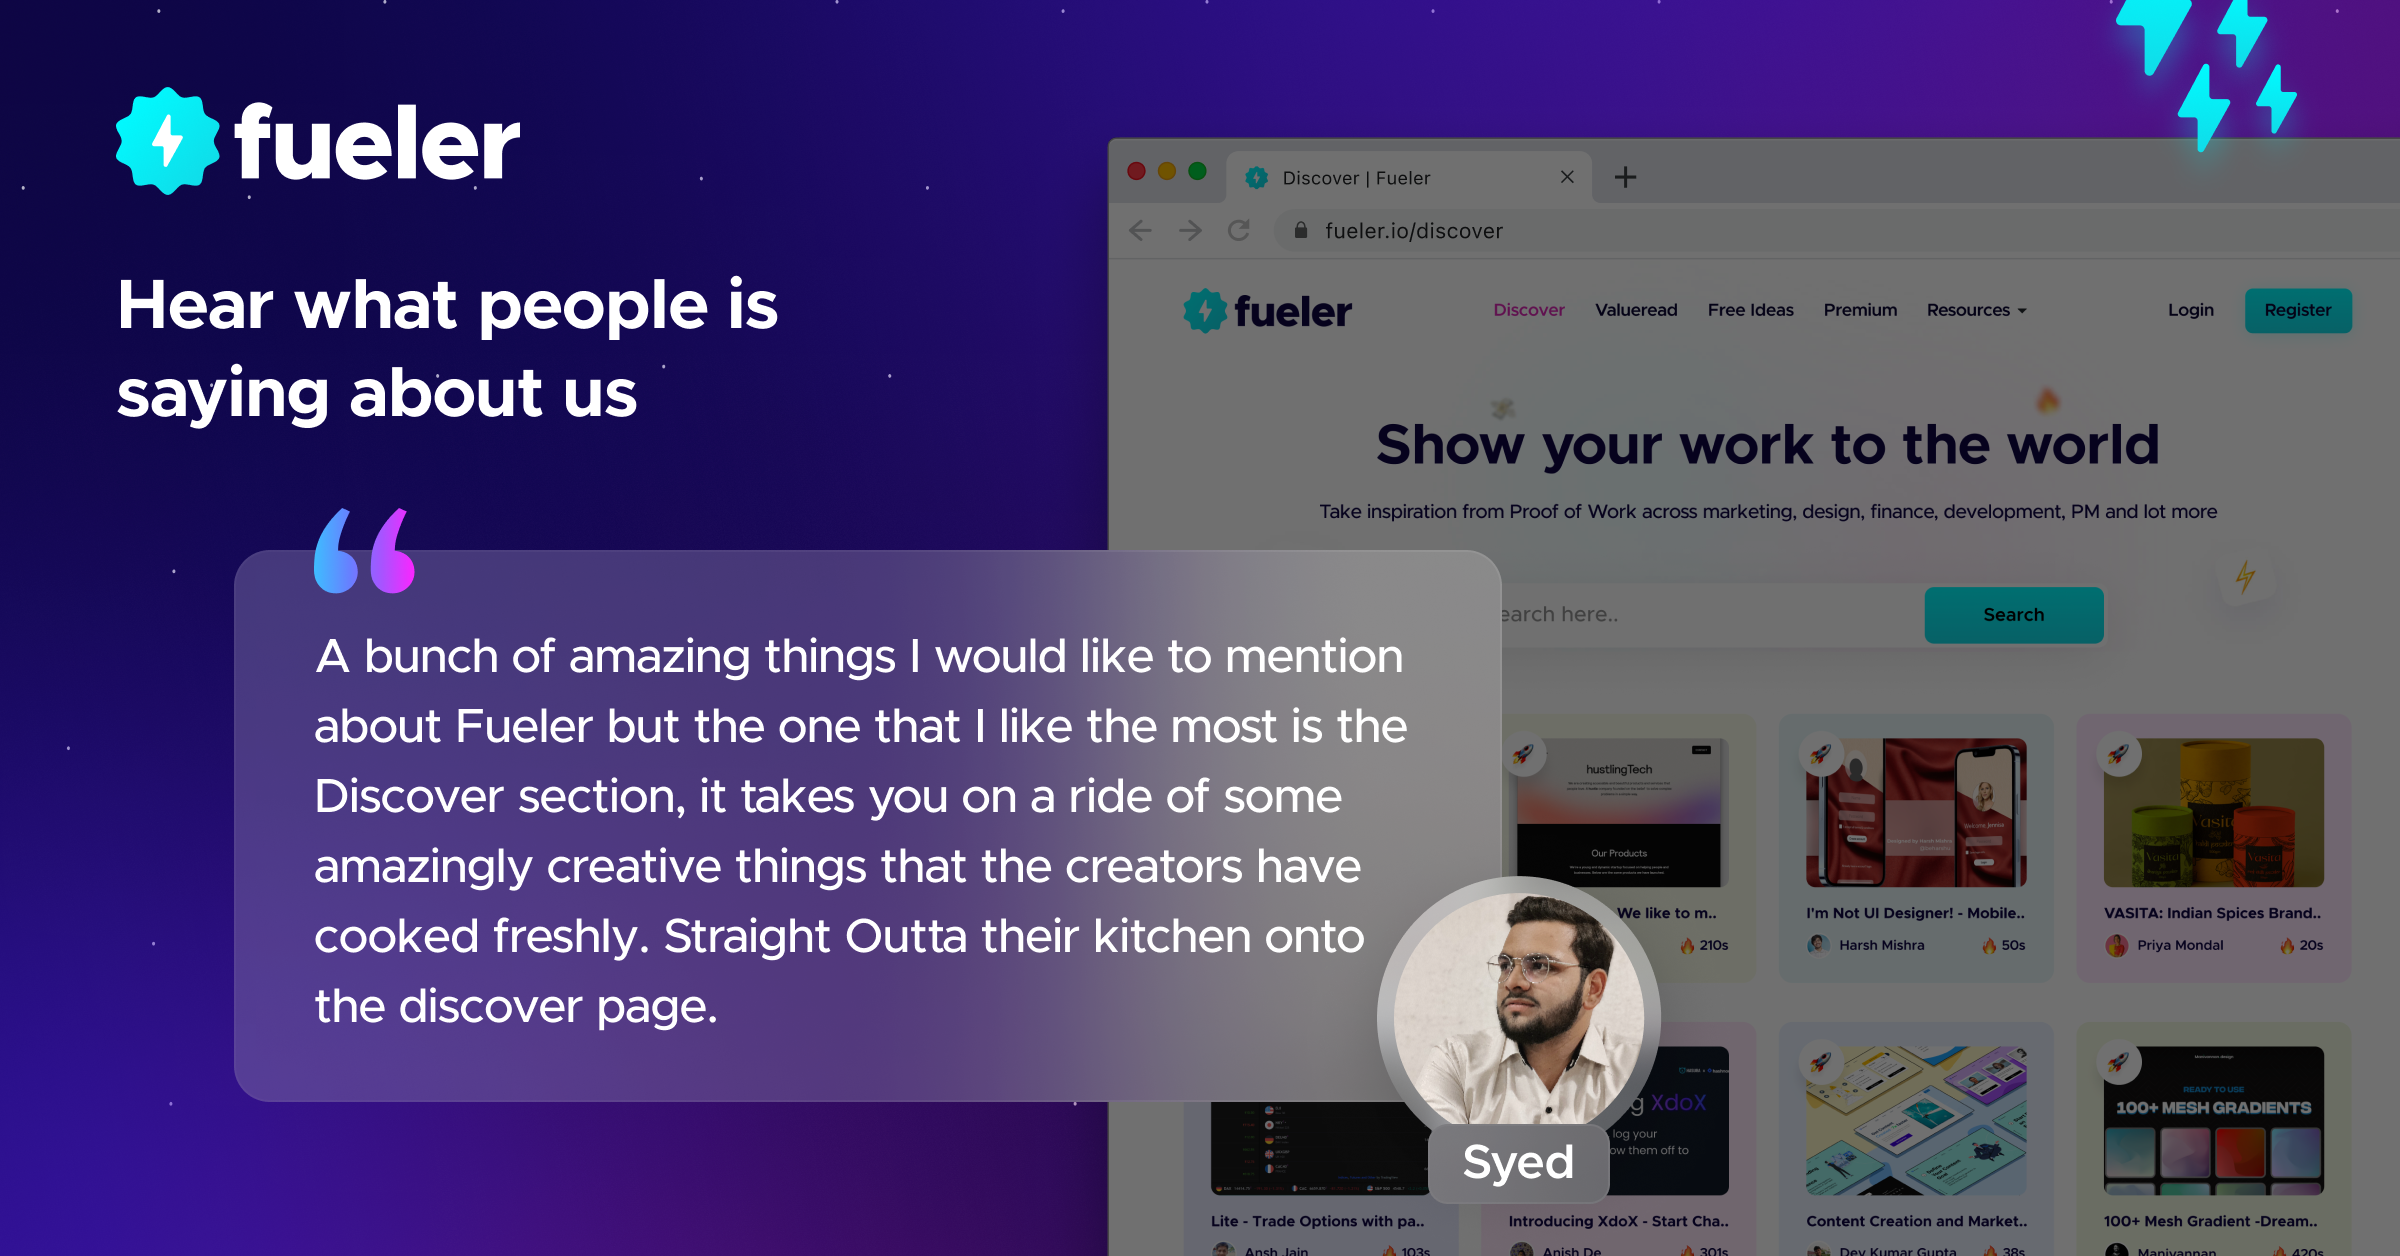 Syed shared kind word about Fueler || https://fueler.io/ali.designs